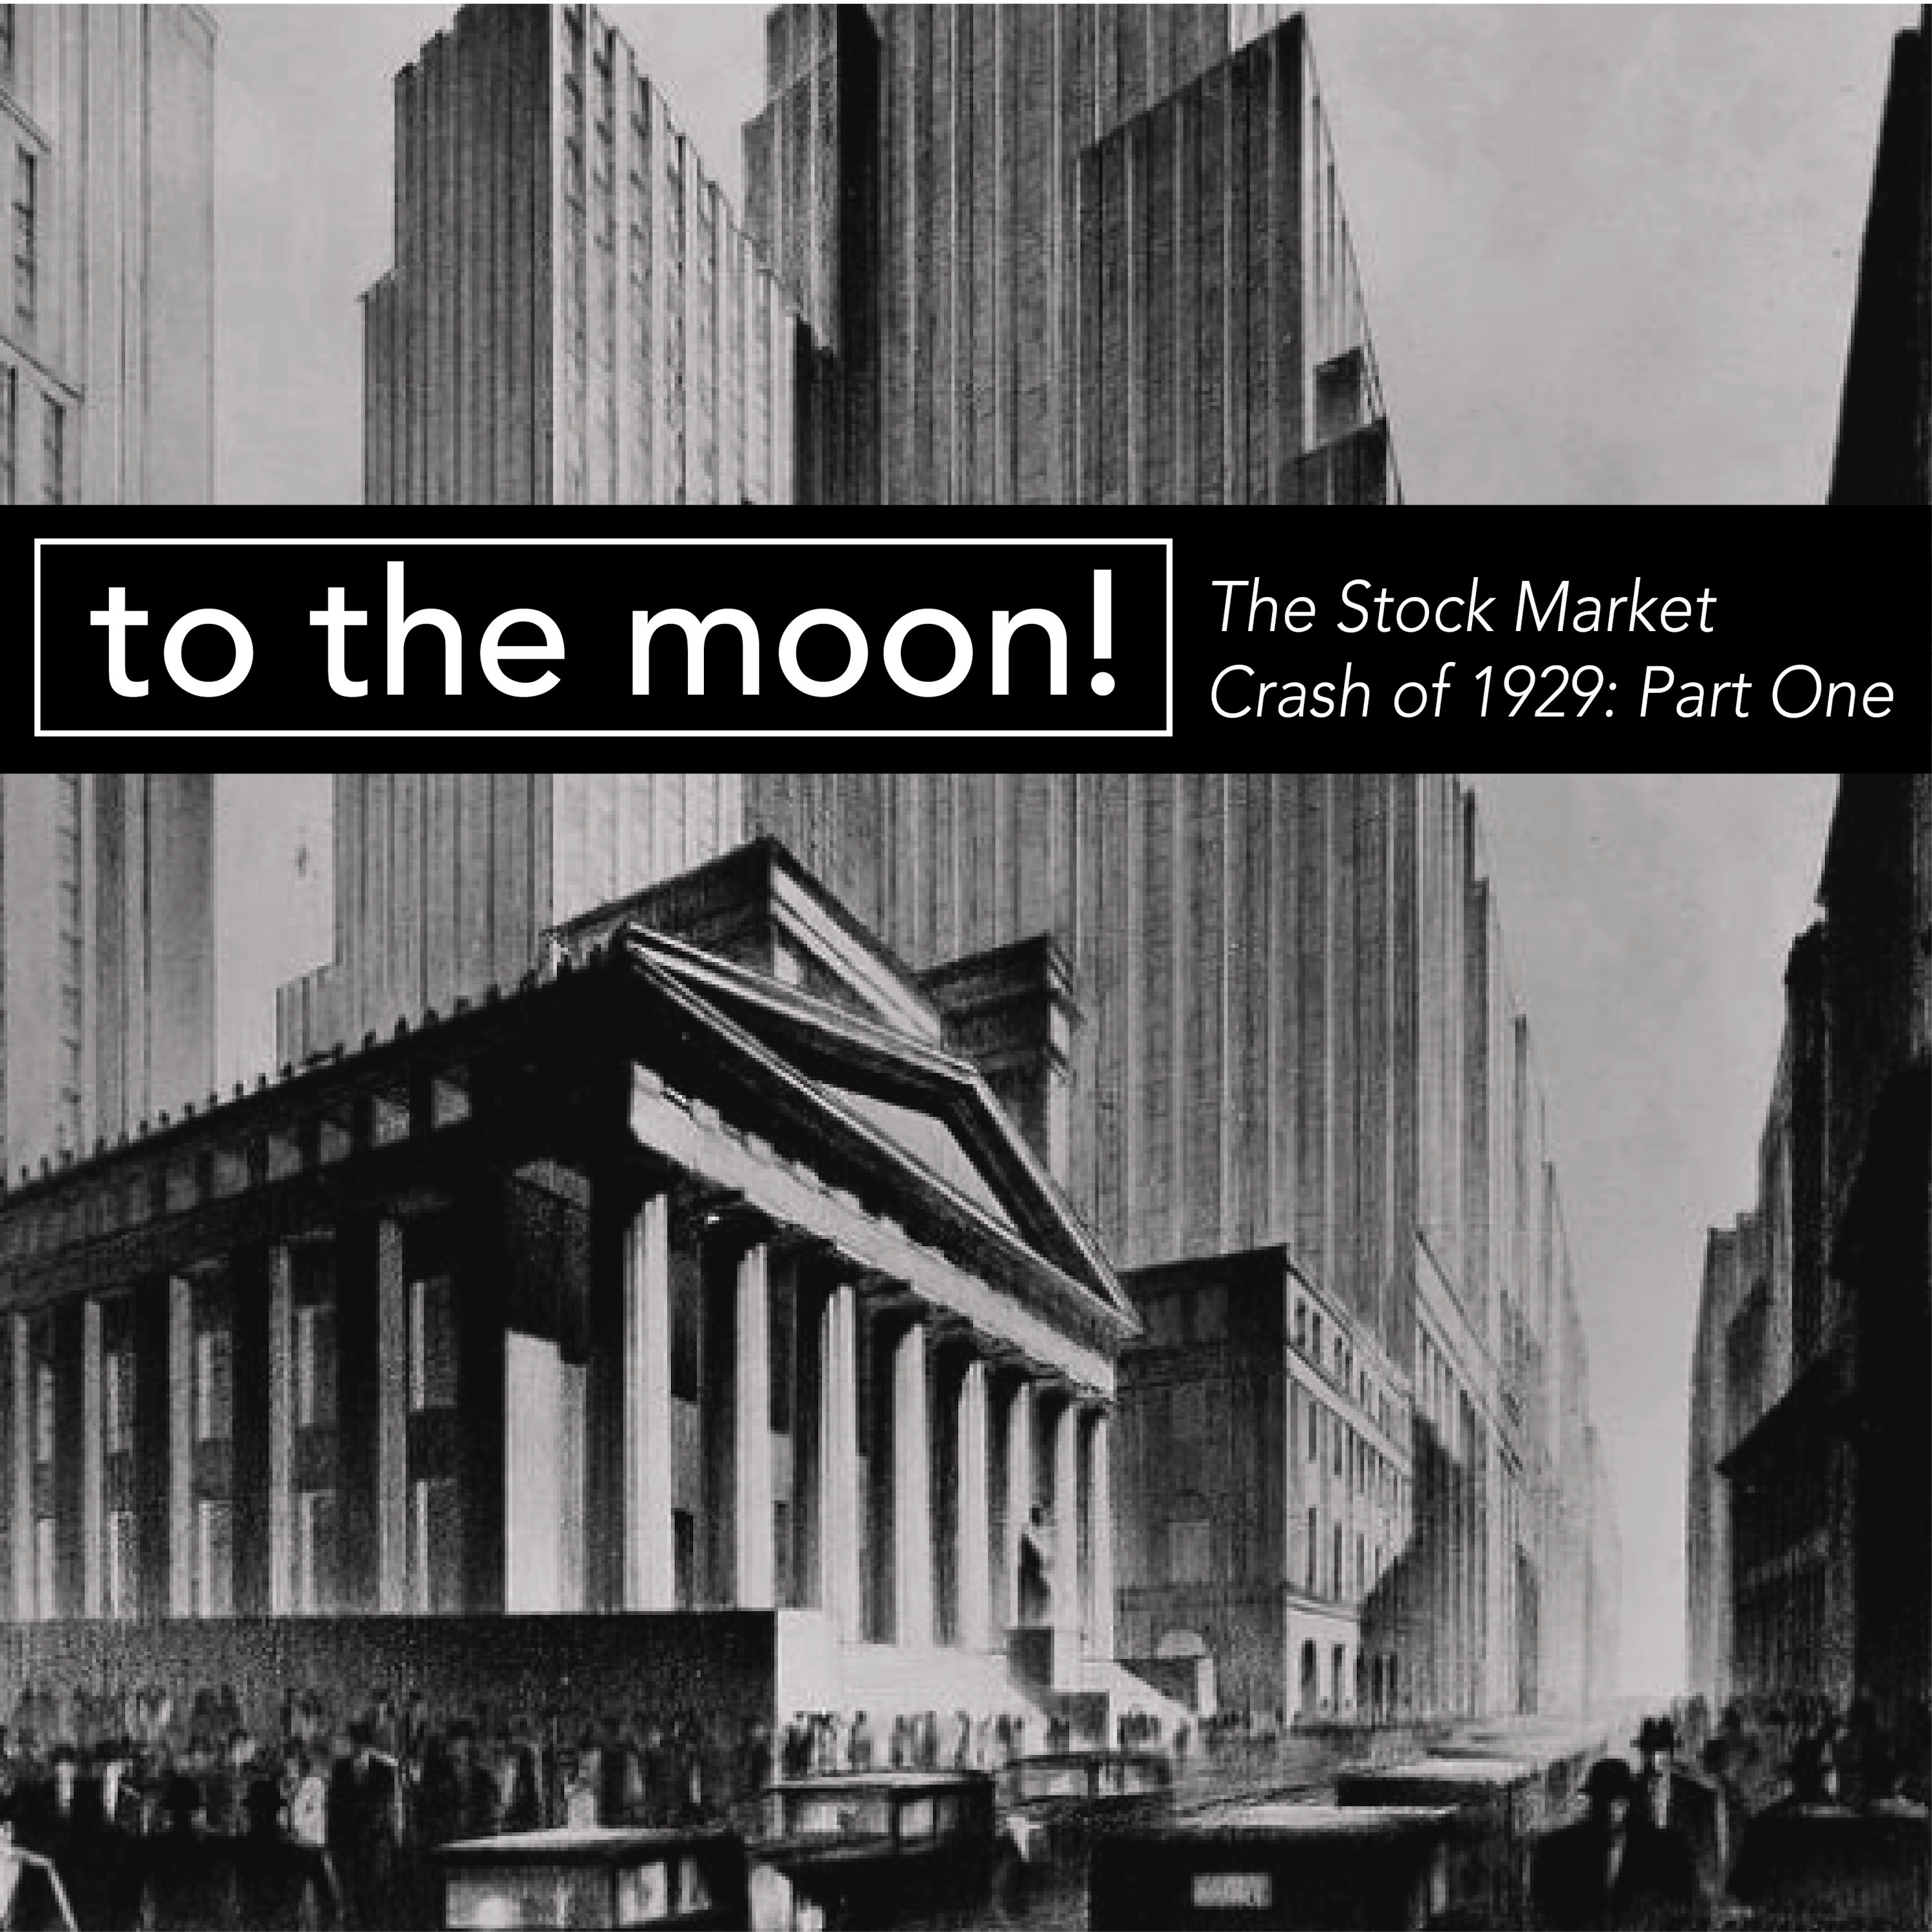 The Stock Market Crash of 1929 – Part 1: To The Moon!